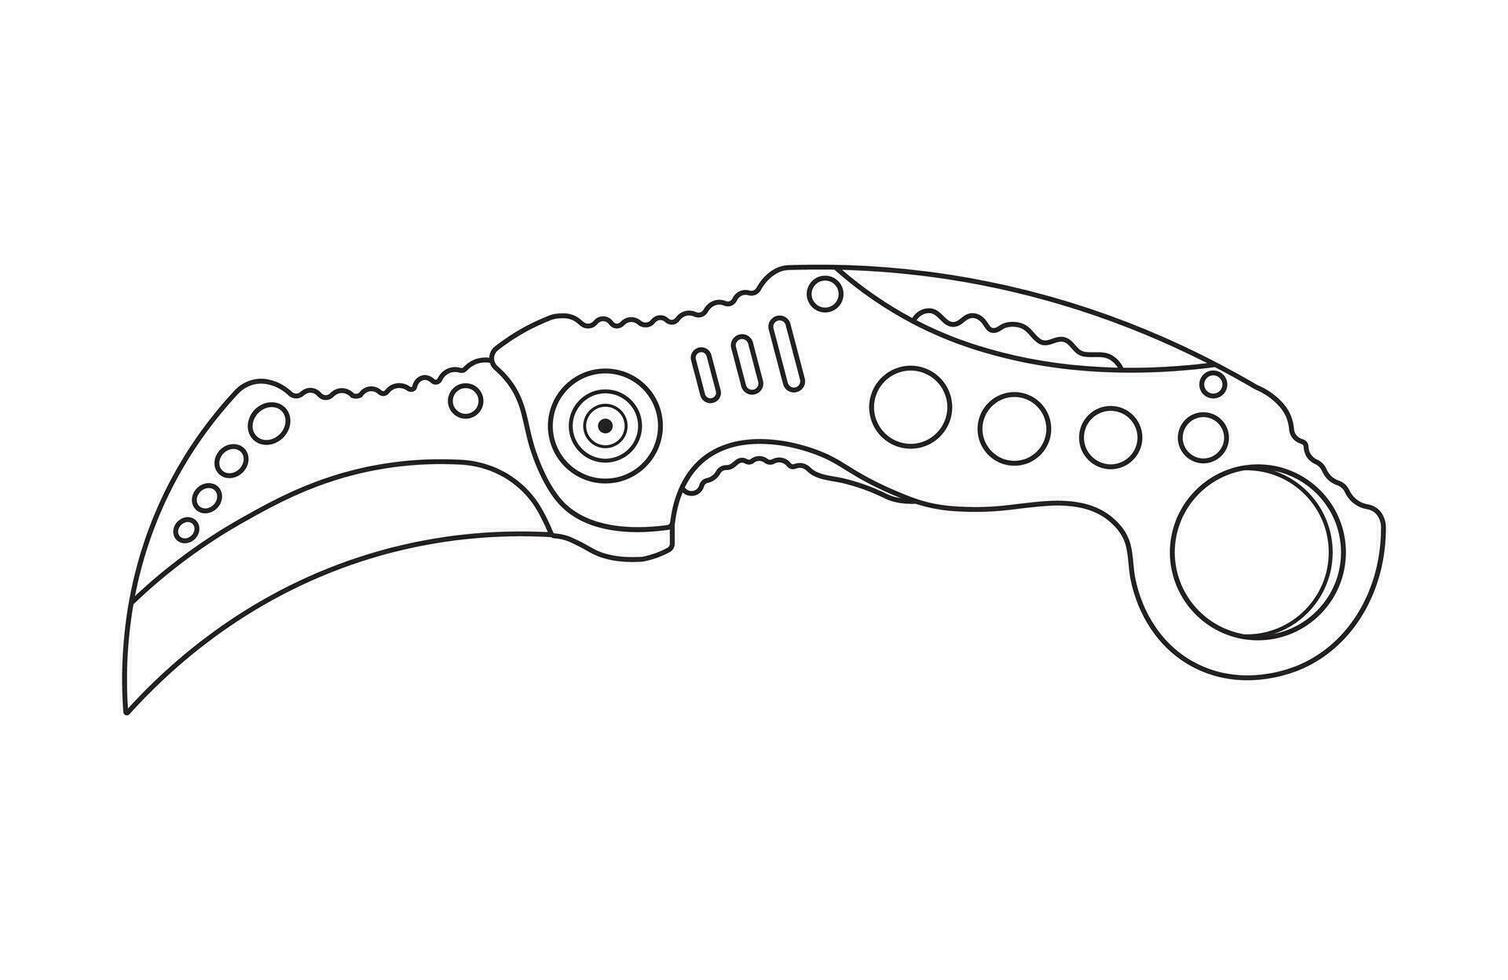 Hand drawn Kids drawing Cartoon Vector illustration karambit folding knife Isolated in doodle style